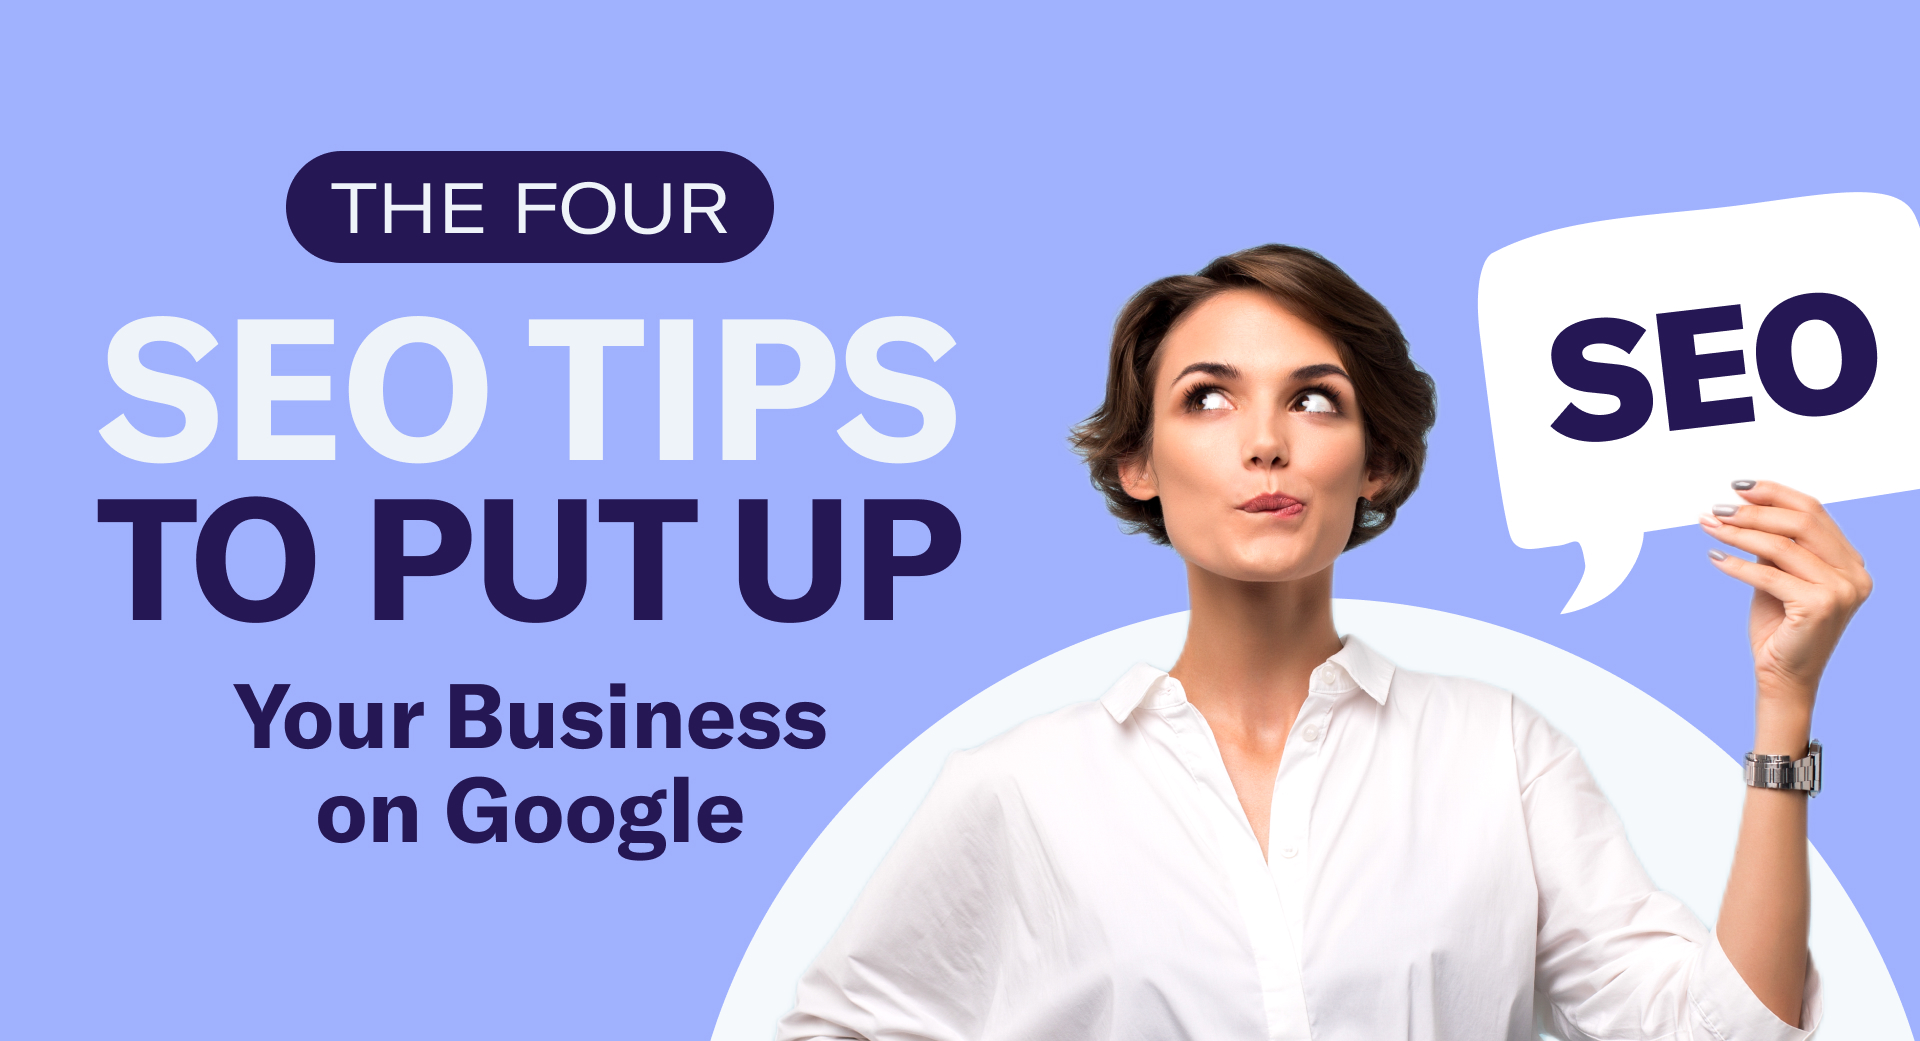 The 4 SEO Tips to Put Up Your Business on Google